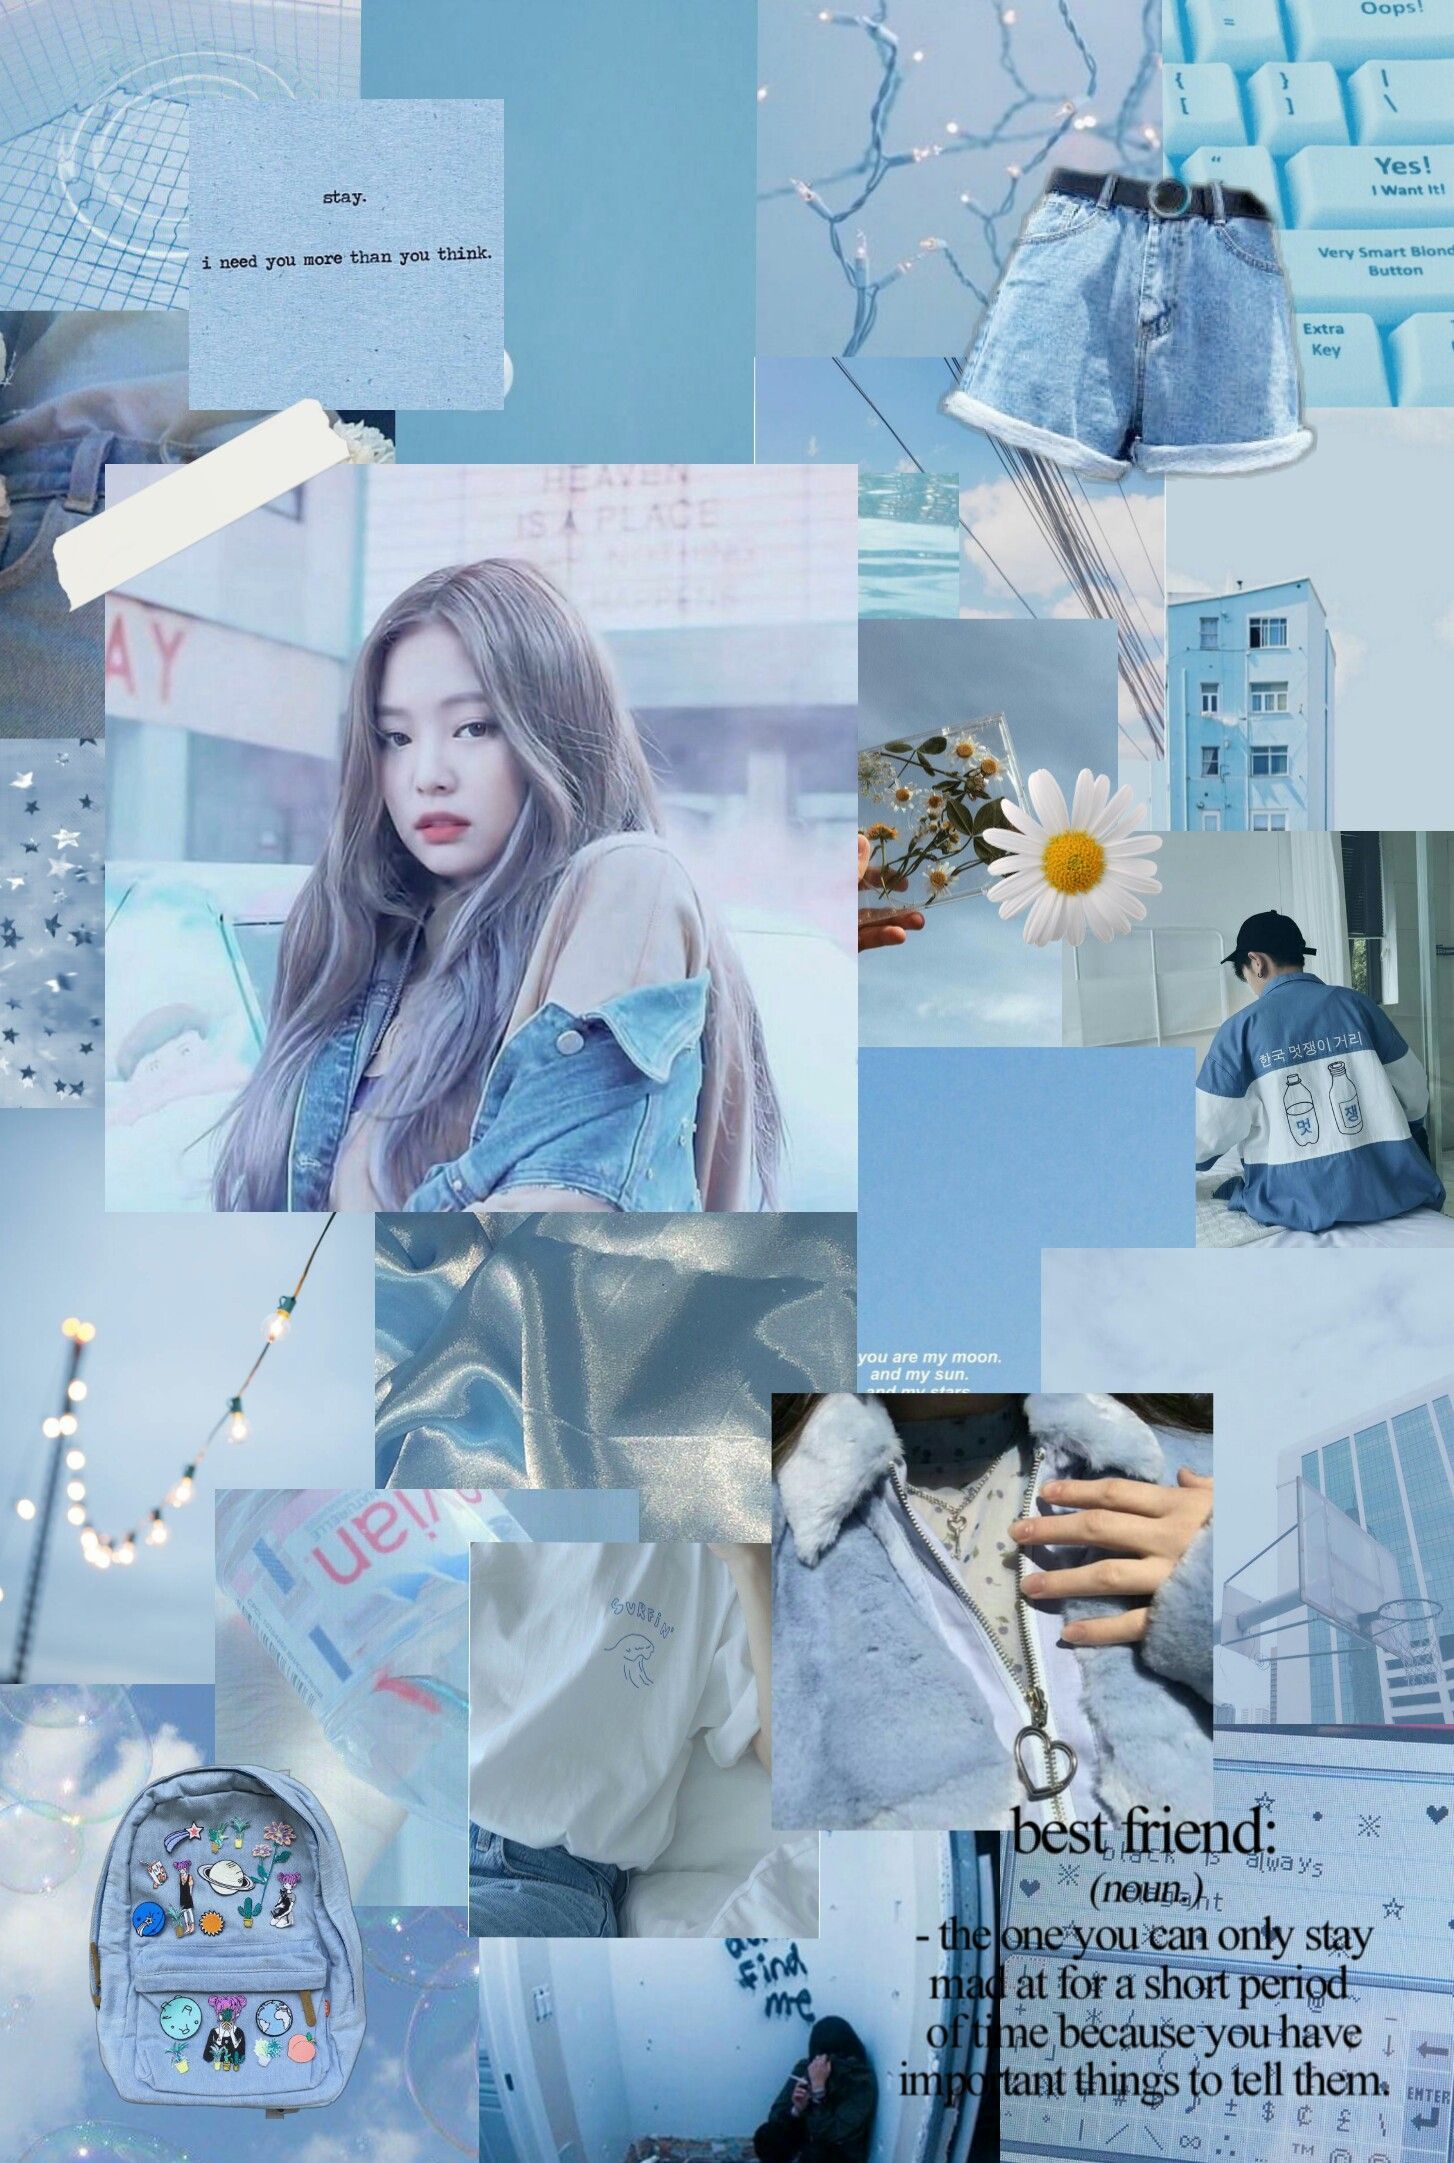 ☁ #blackpink #jennie #queen #beautiful #aesthetic #collage #wallpaper #blue ♡♡♡♡ #freetoedit. Aesthetic collage, Blue aesthetic, Aesthetic background